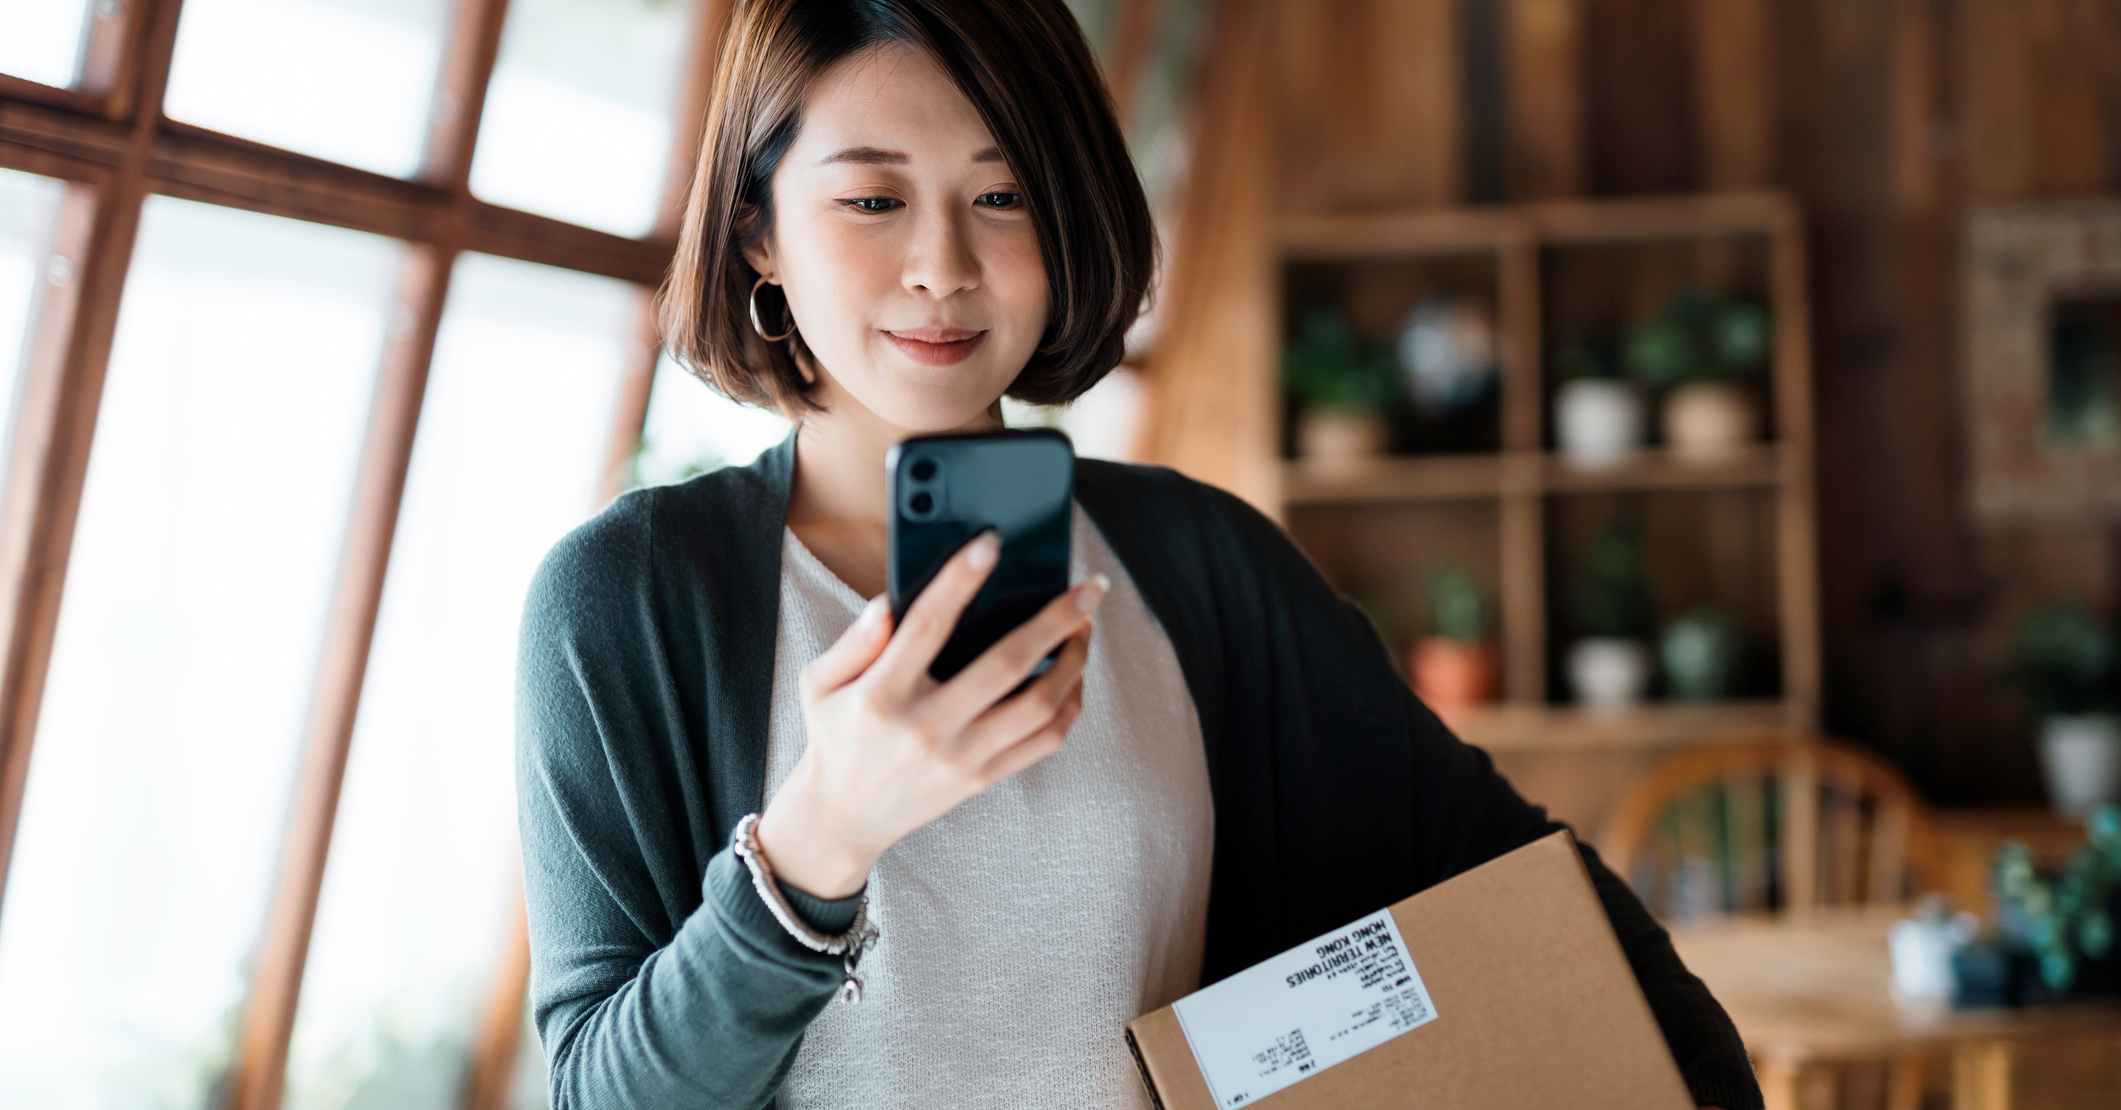 A woman with short hair smiling at her phone holding a box 